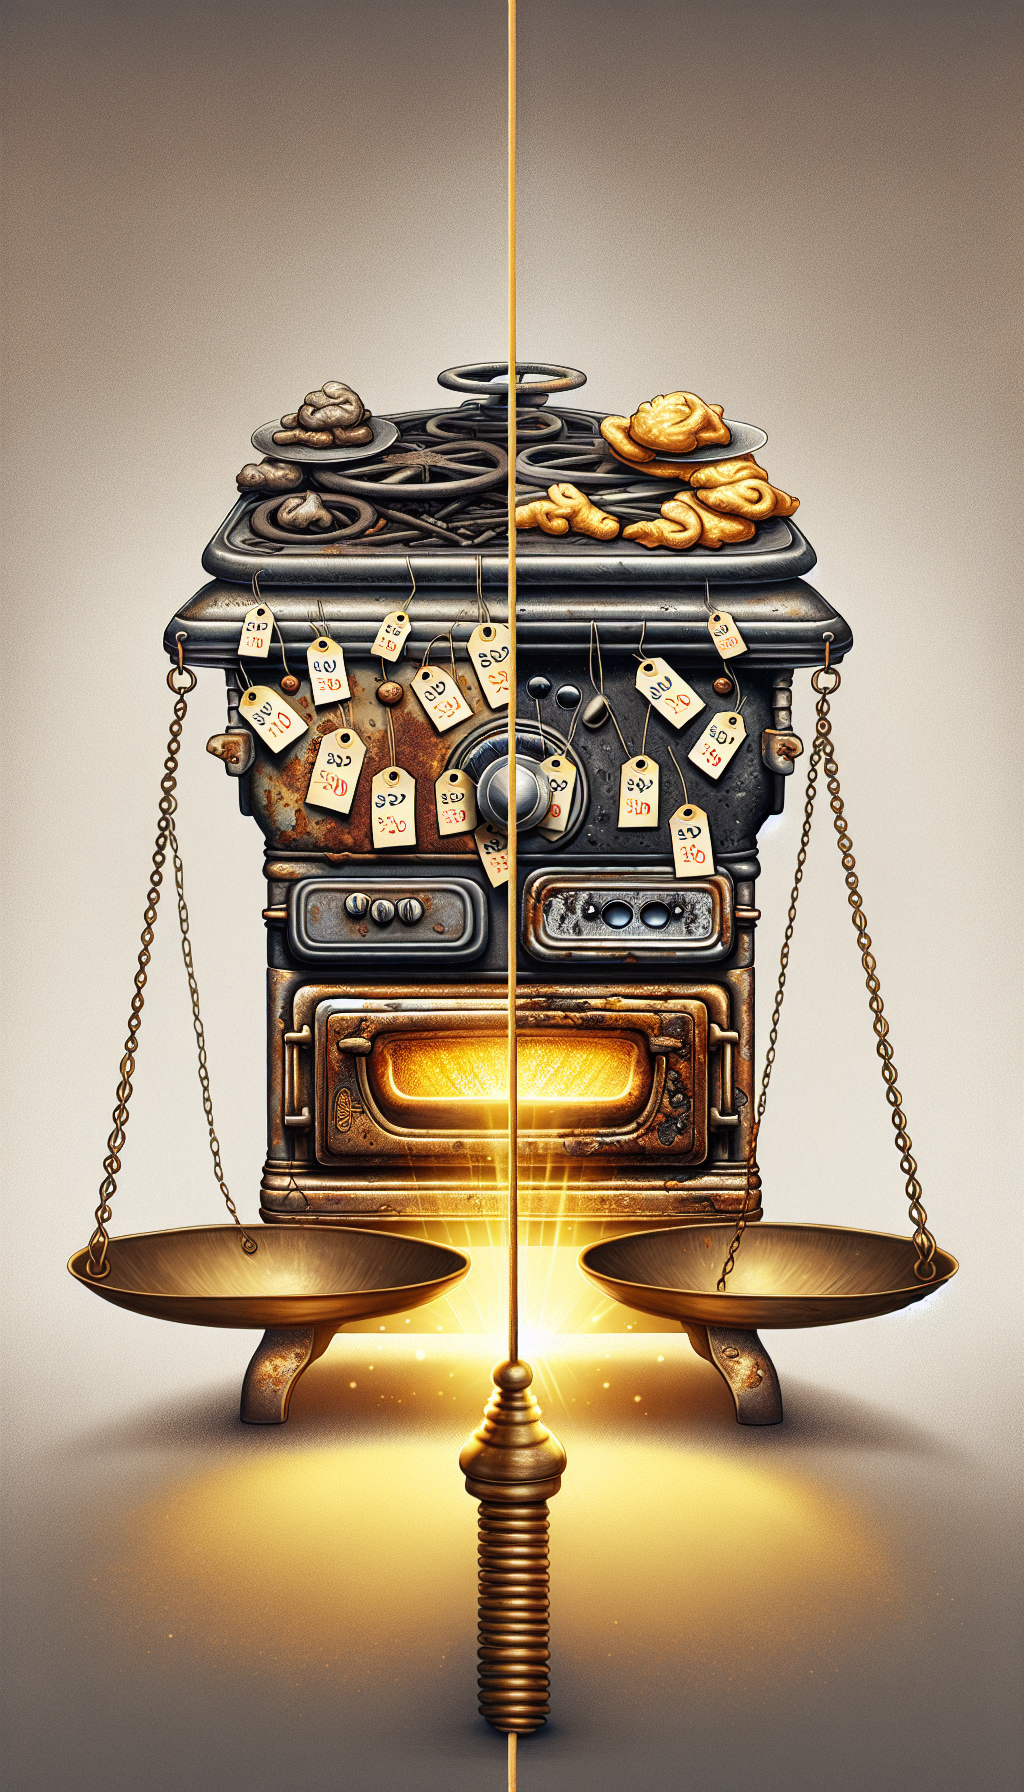 An illustration split diagonally: on the top, a dull, rusted antique stove with price tags decreasing in value; on the bottom, the same stove restored to a shiny finish with rising price tags. The restored side shimmers with golden light, hinting at increased value, while a balance scale at the center tips towards the restored stove, symbolizing its enhanced market price.